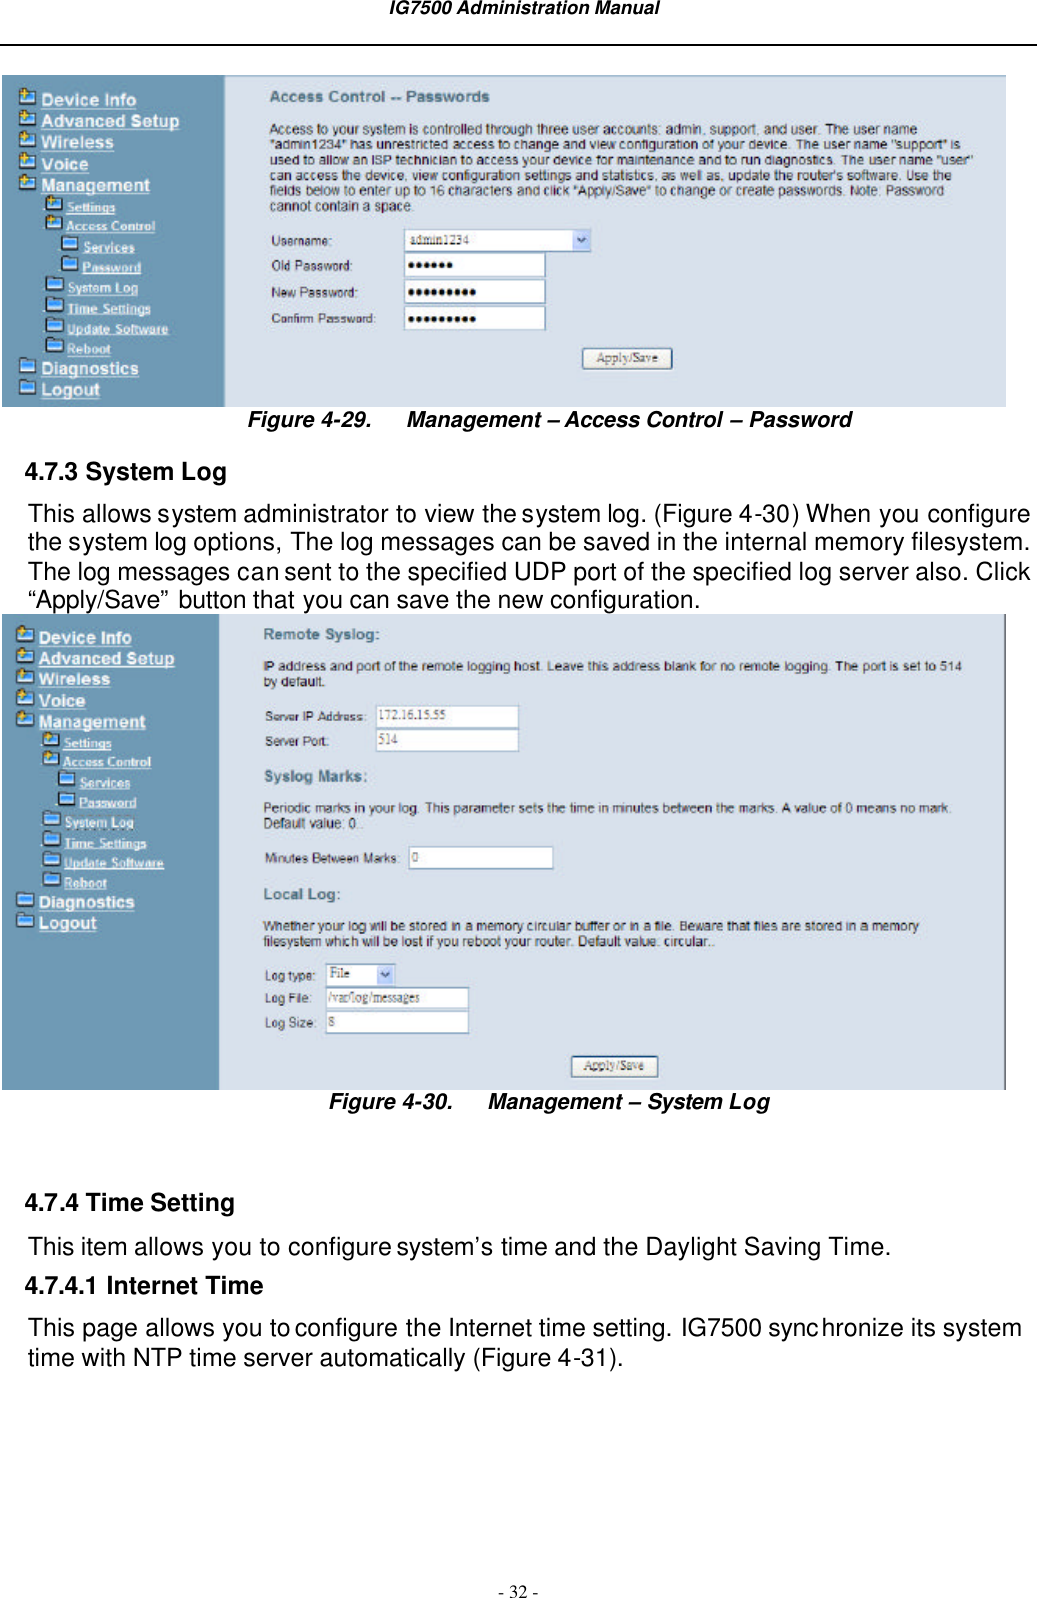  IG7500 Administration Manual  - 32 -  Figure 4-29. Management – Access Control – Password 4.7.3 System Log This allows system administrator to view the system log. (Figure 4-30) When you configure the system log options, The log messages can be saved in the internal memory filesystem. The log messages can sent to the specified UDP port of the specified log server also. Click “Apply/Save” button that you can save the new configuration.    Figure 4-30. Management – System Log   4.7.4 Time Setting This item allows you to configure system’s time and the Daylight Saving Time. 4.7.4.1 Internet Time This page allows you to configure the Internet time setting. IG7500 synchronize its system time with NTP time server automatically (Figure 4-31).   